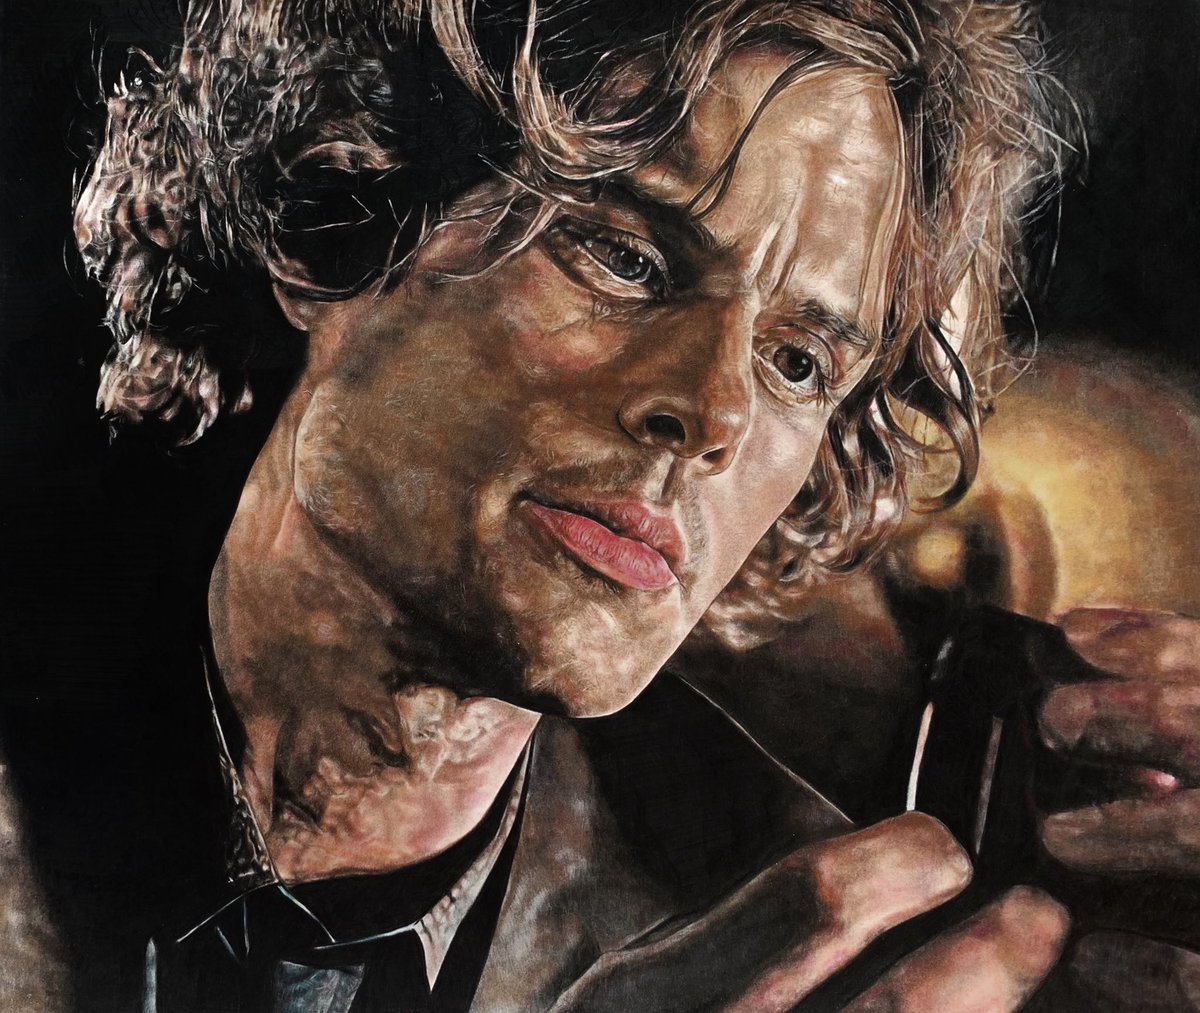 my 7th drawing of matthew gray gubler as dr. spencer reid from season 12 of criminal minds 🤎 made with colored pencils, time taken is around 40-45 hours (2 weeks) hope you’ll like it as much as i do! :) @GUBLERNATION @criminalminds #matthewgraygubler #Criminalminds